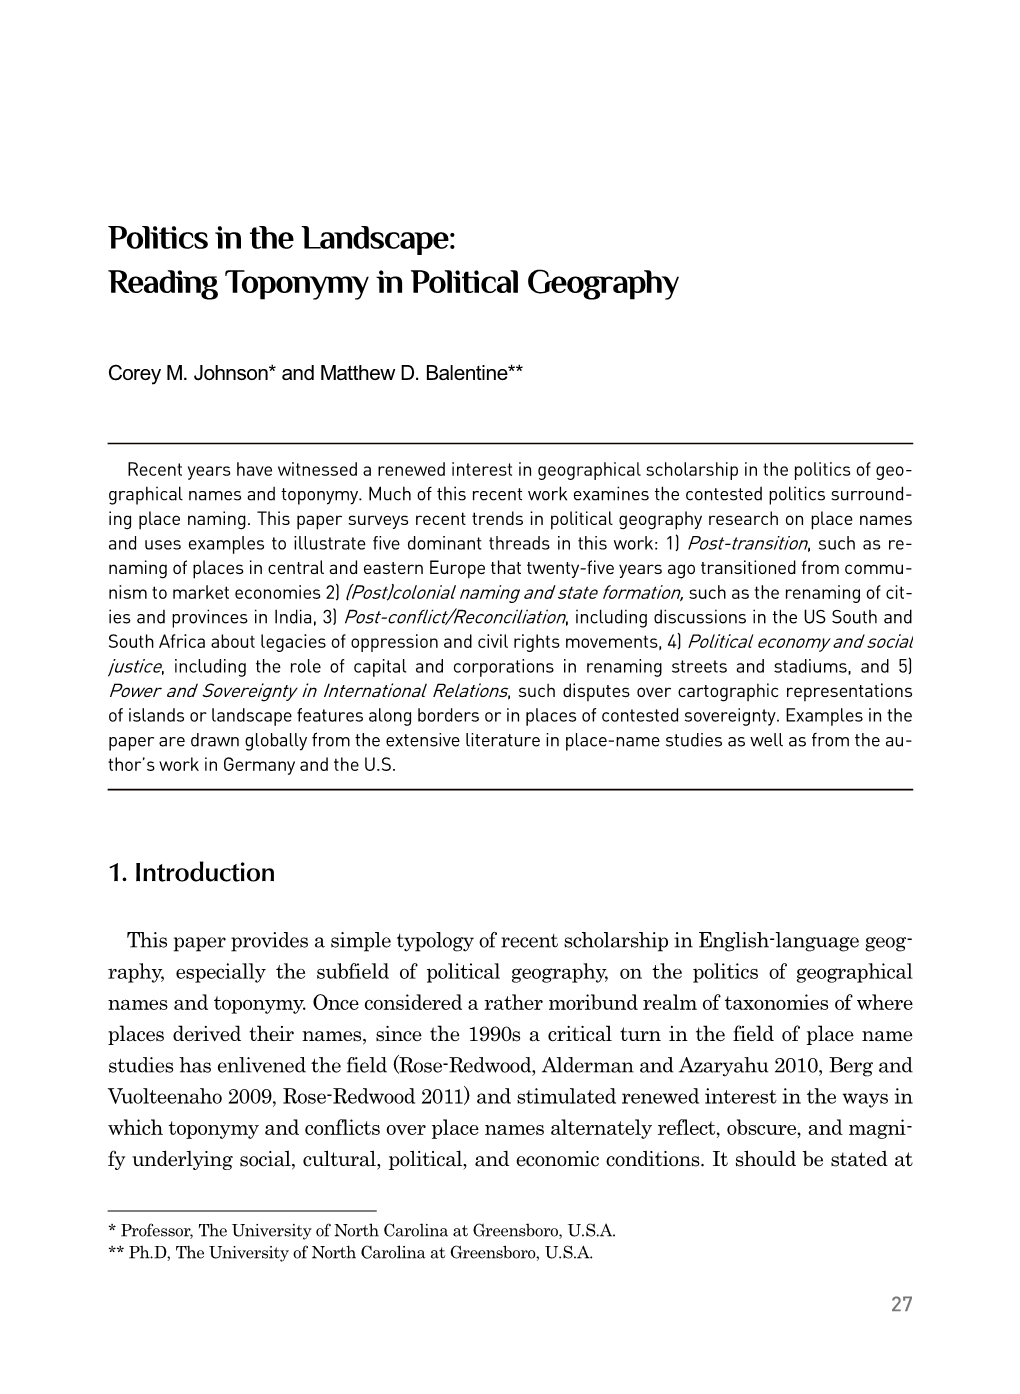 Politics in the Landscape: Reading Toponymy in Political Geography